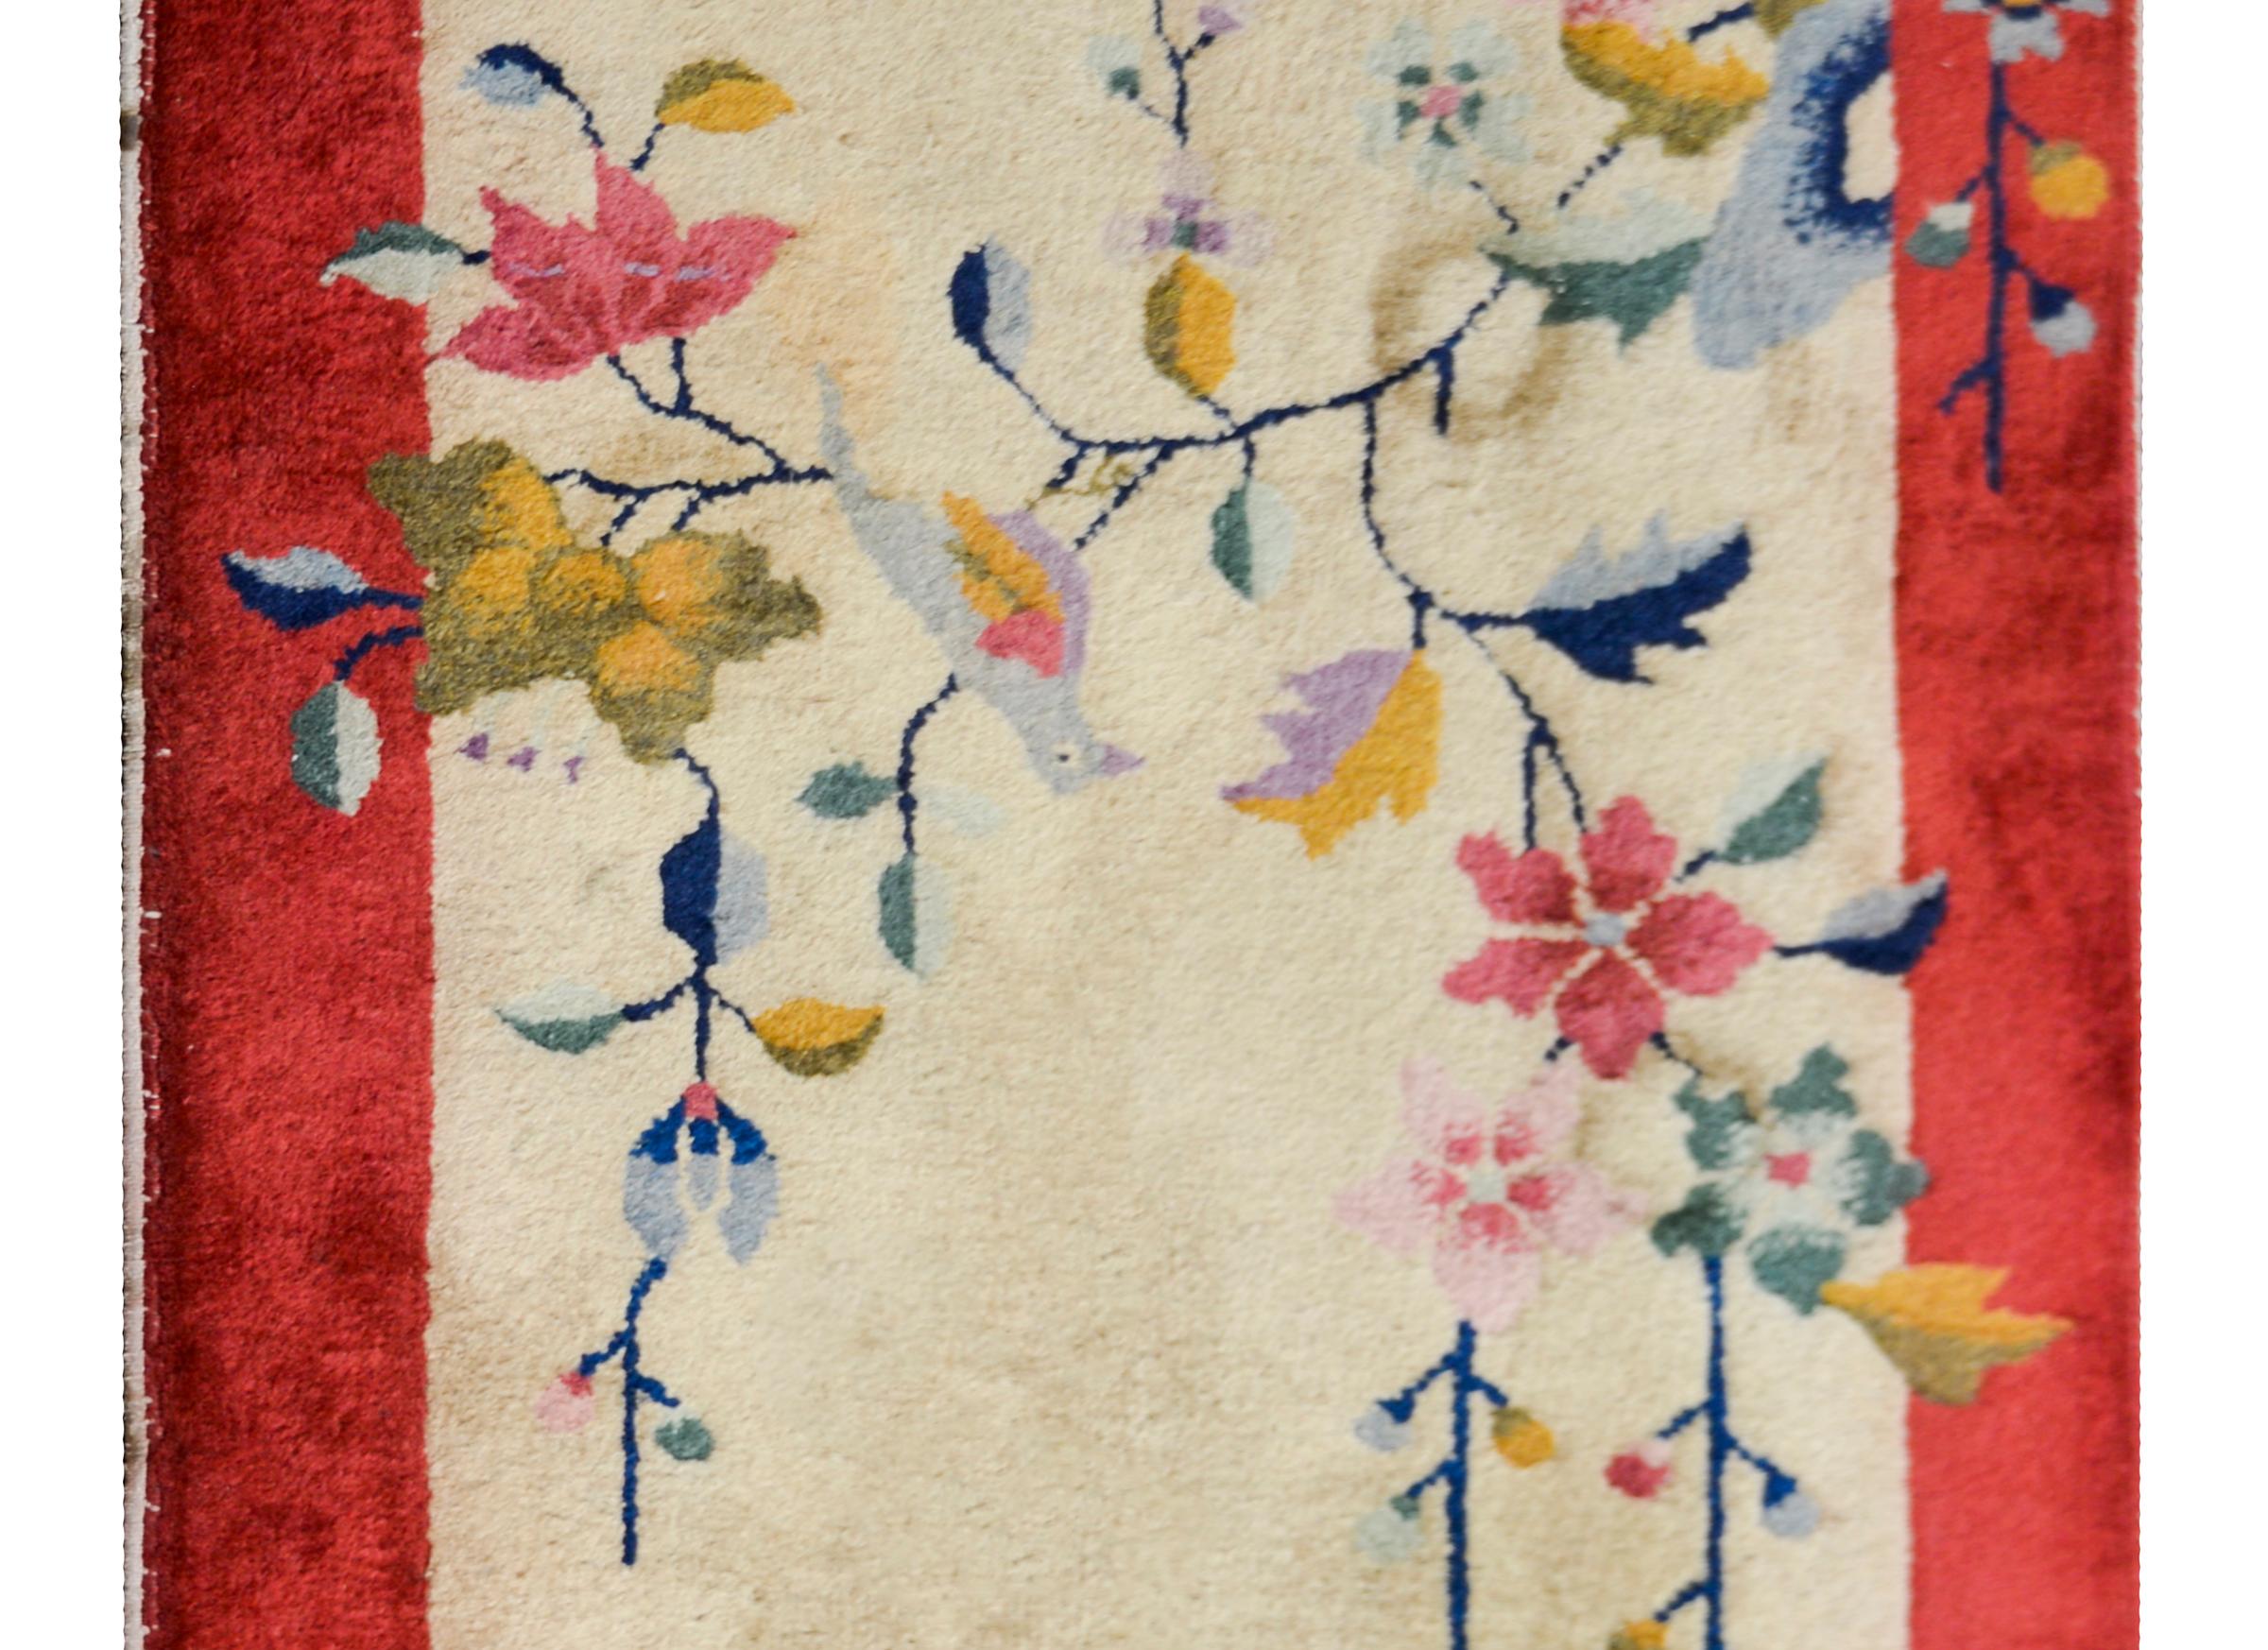 An early 20th century Chinese Art Deco rug with a champagne colored field surrounded by a white cranberry border, and overlaid with multi-colored peonies and prunus blossoms.